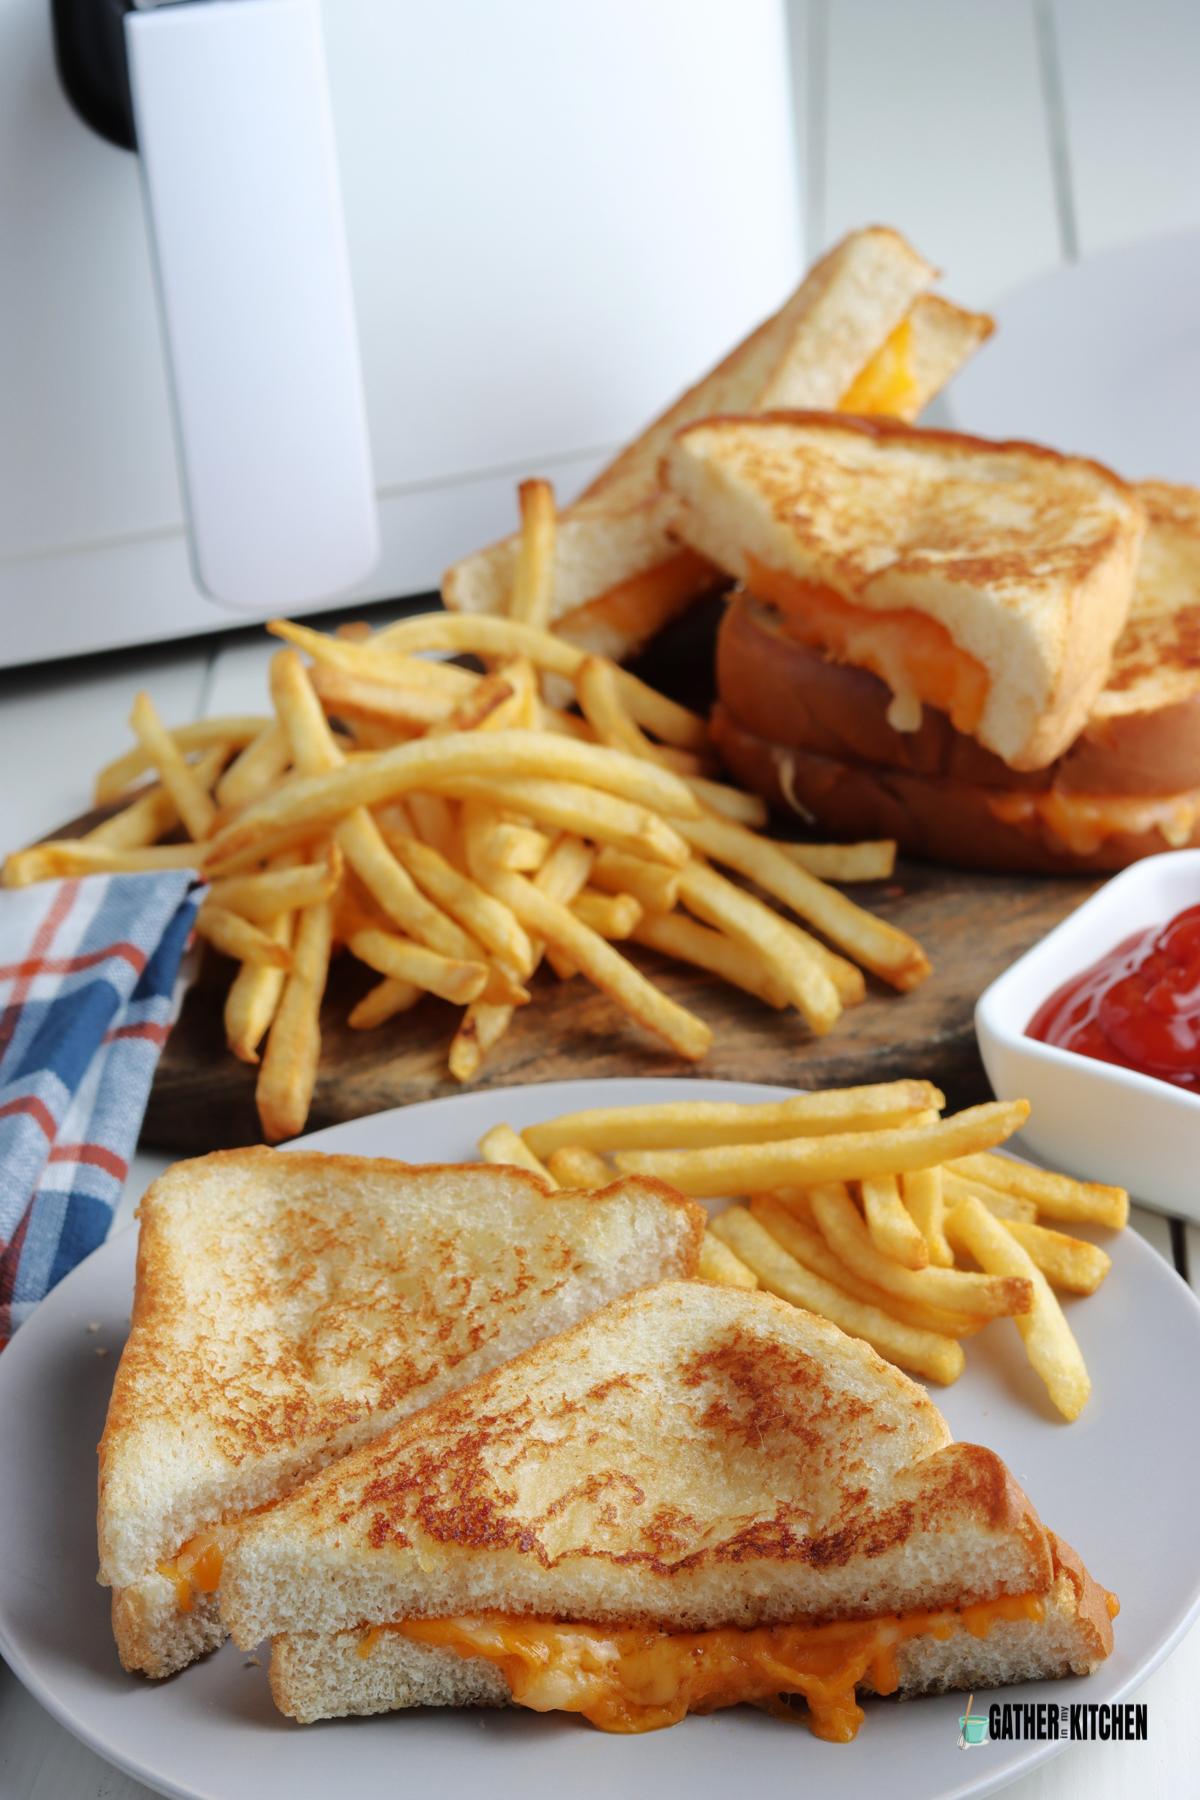 Two halves of air fryer cheese sandwich on a plate with fries next to it.